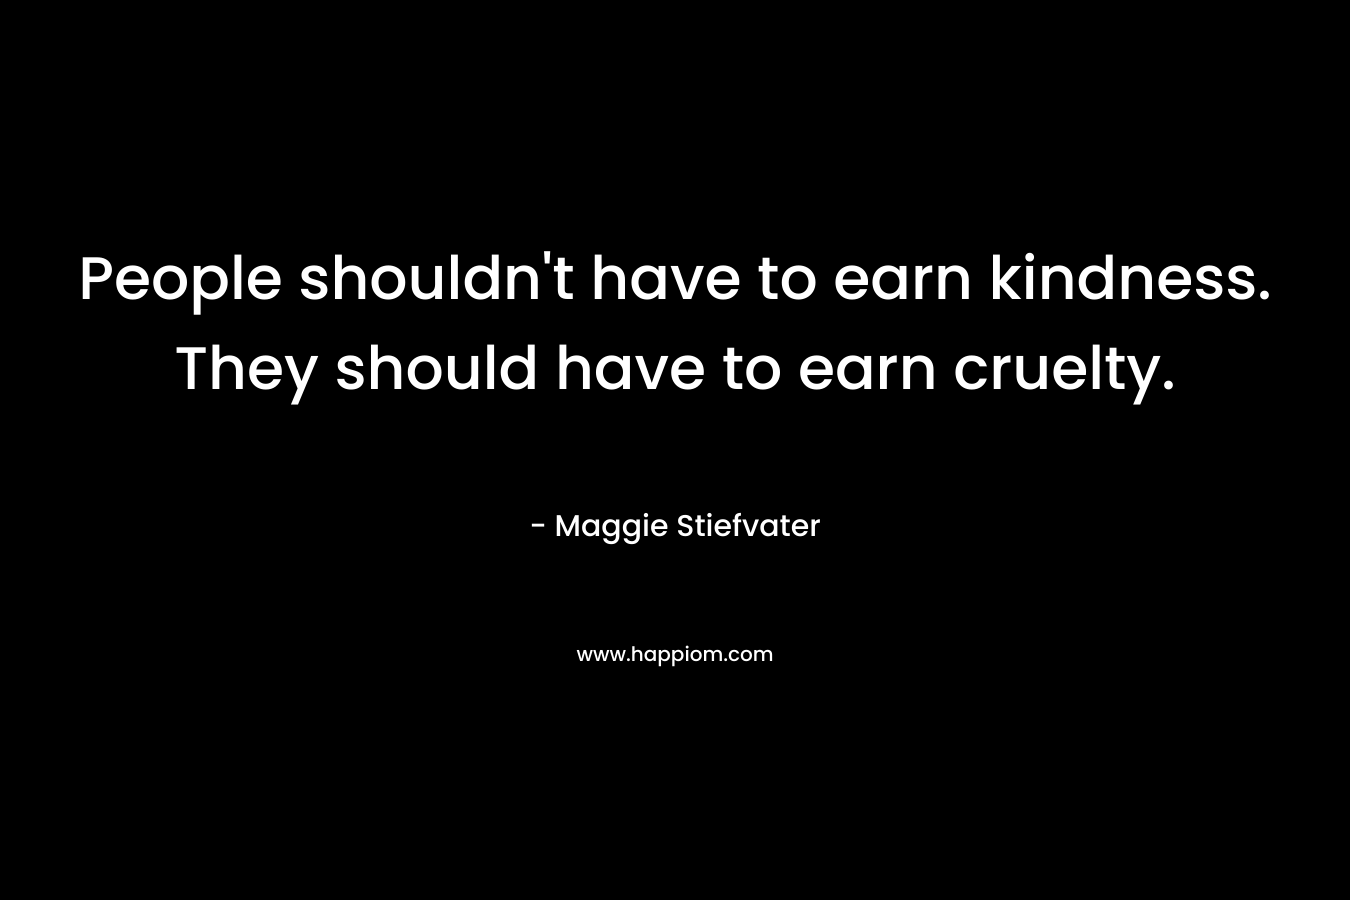 People shouldn't have to earn kindness. They should have to earn cruelty.